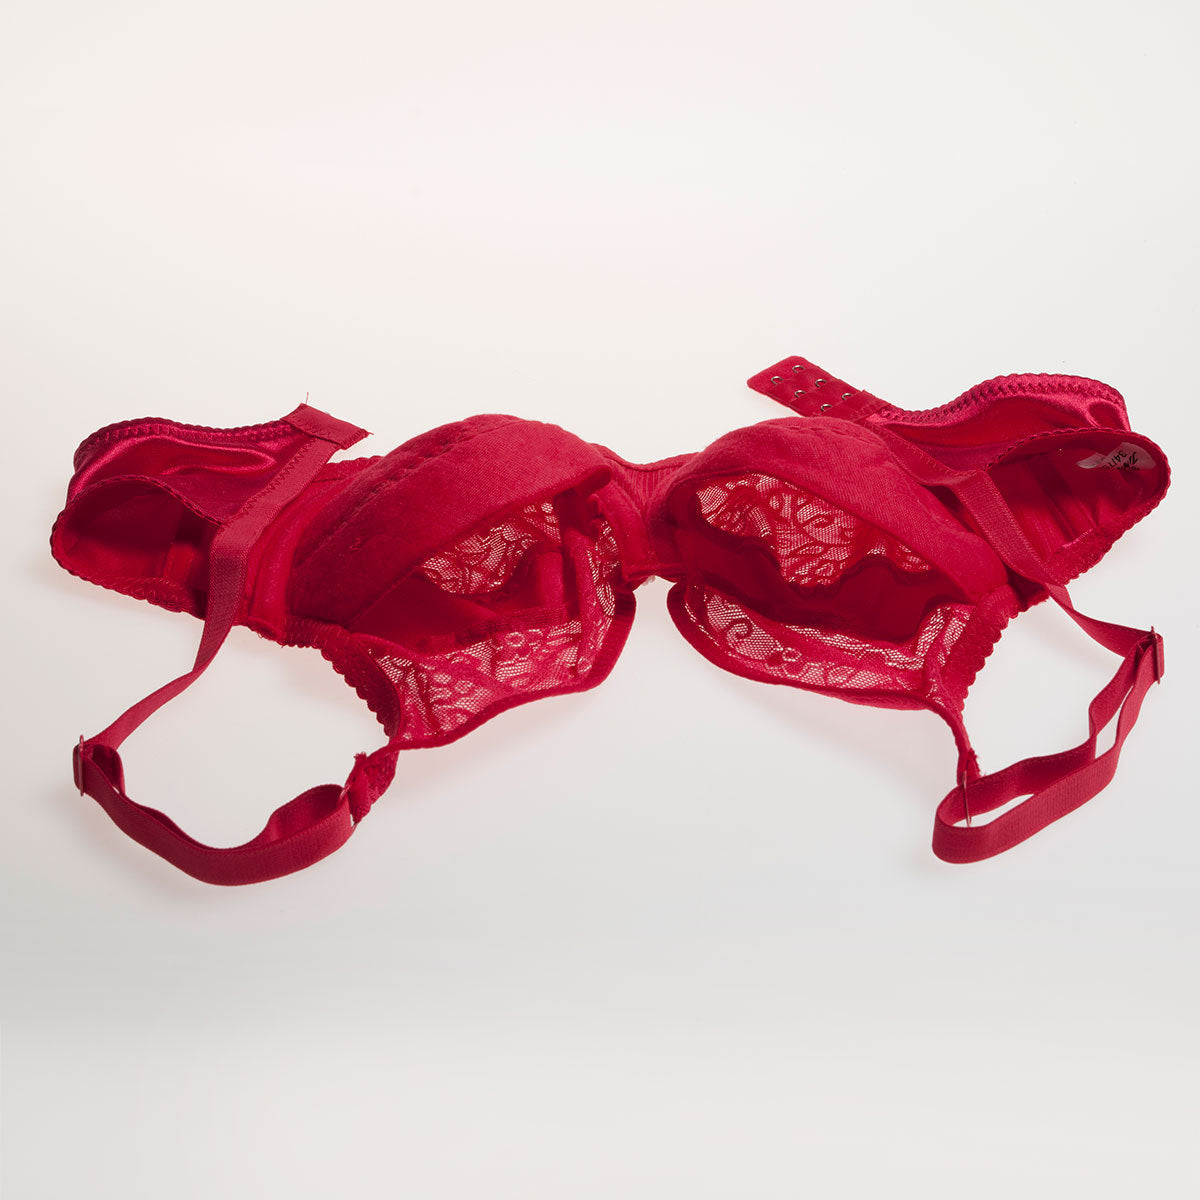 Teardrop Shaped Silicone Breast Forms with Red Pocket Bra